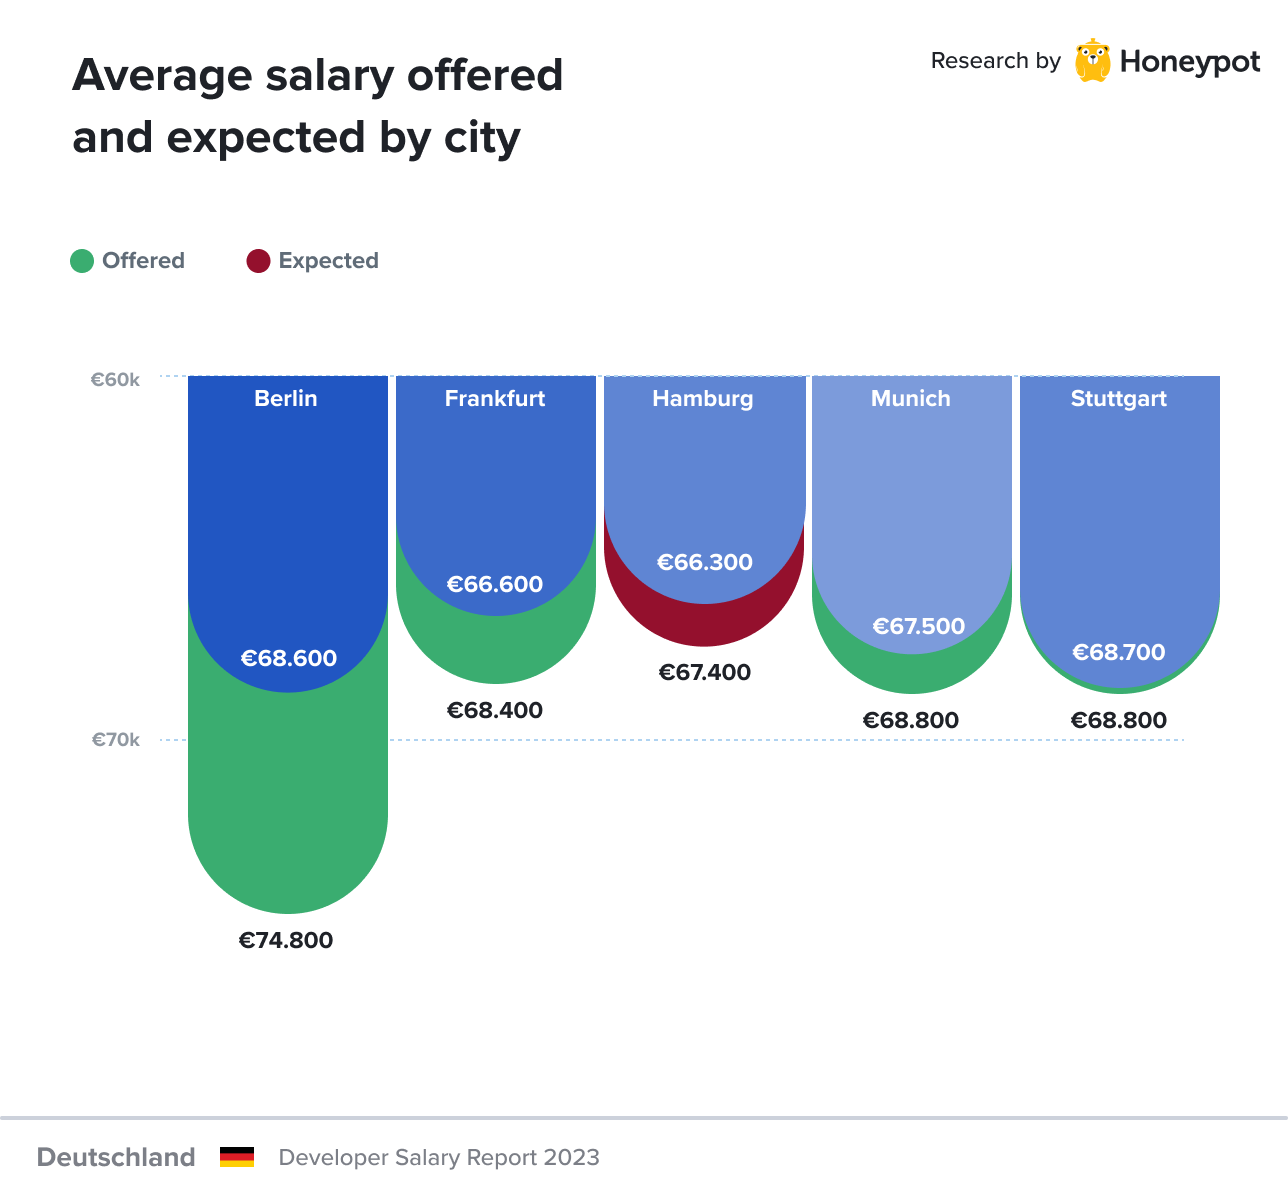 Germany – Average offered and expected salary by city